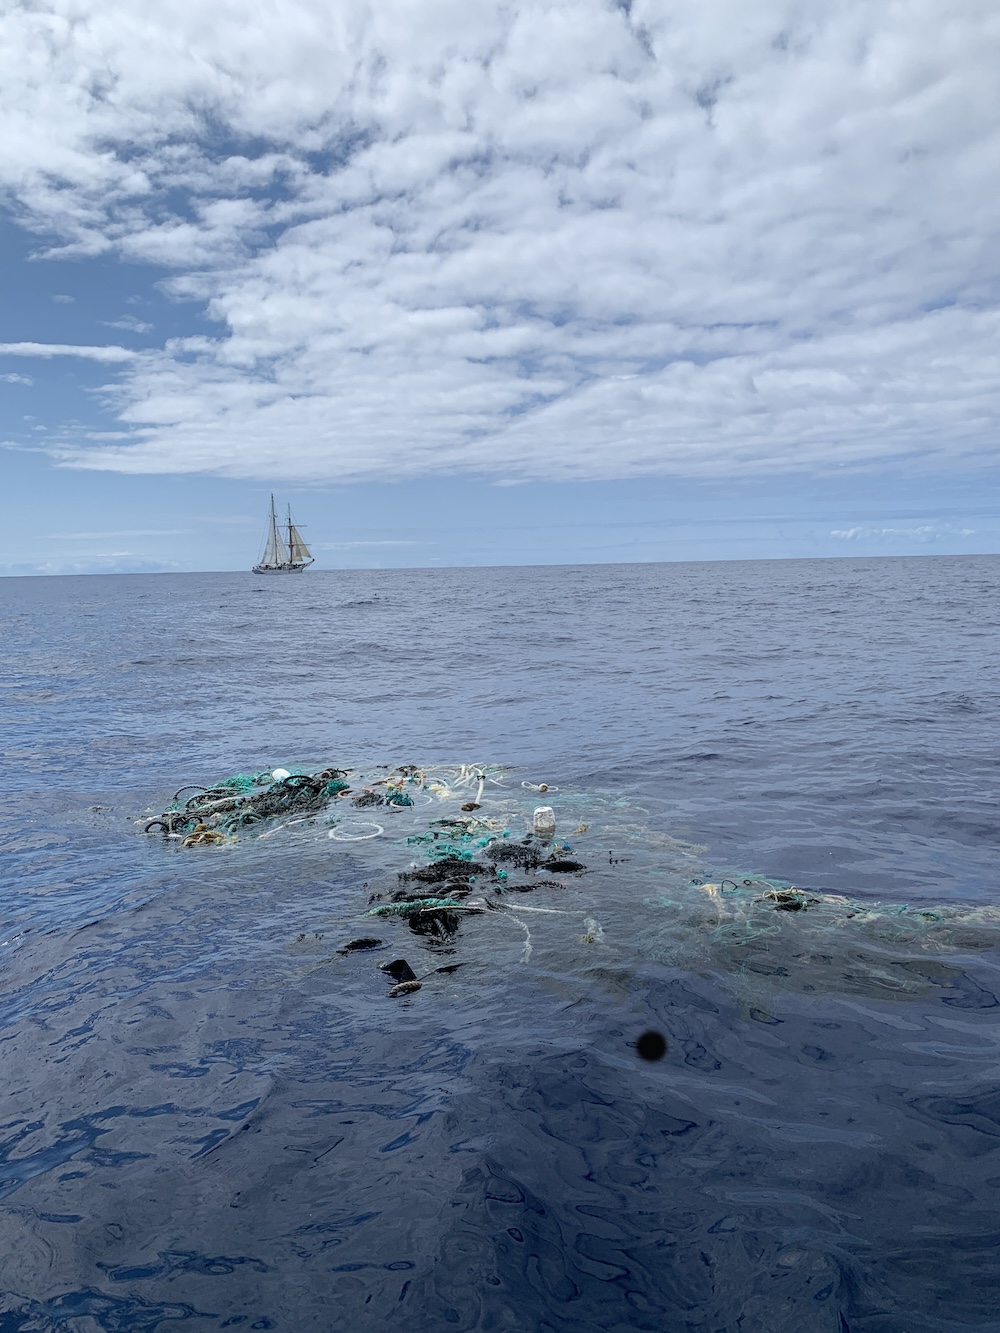 Plastic floating in the ocean with a sailing ship in the background